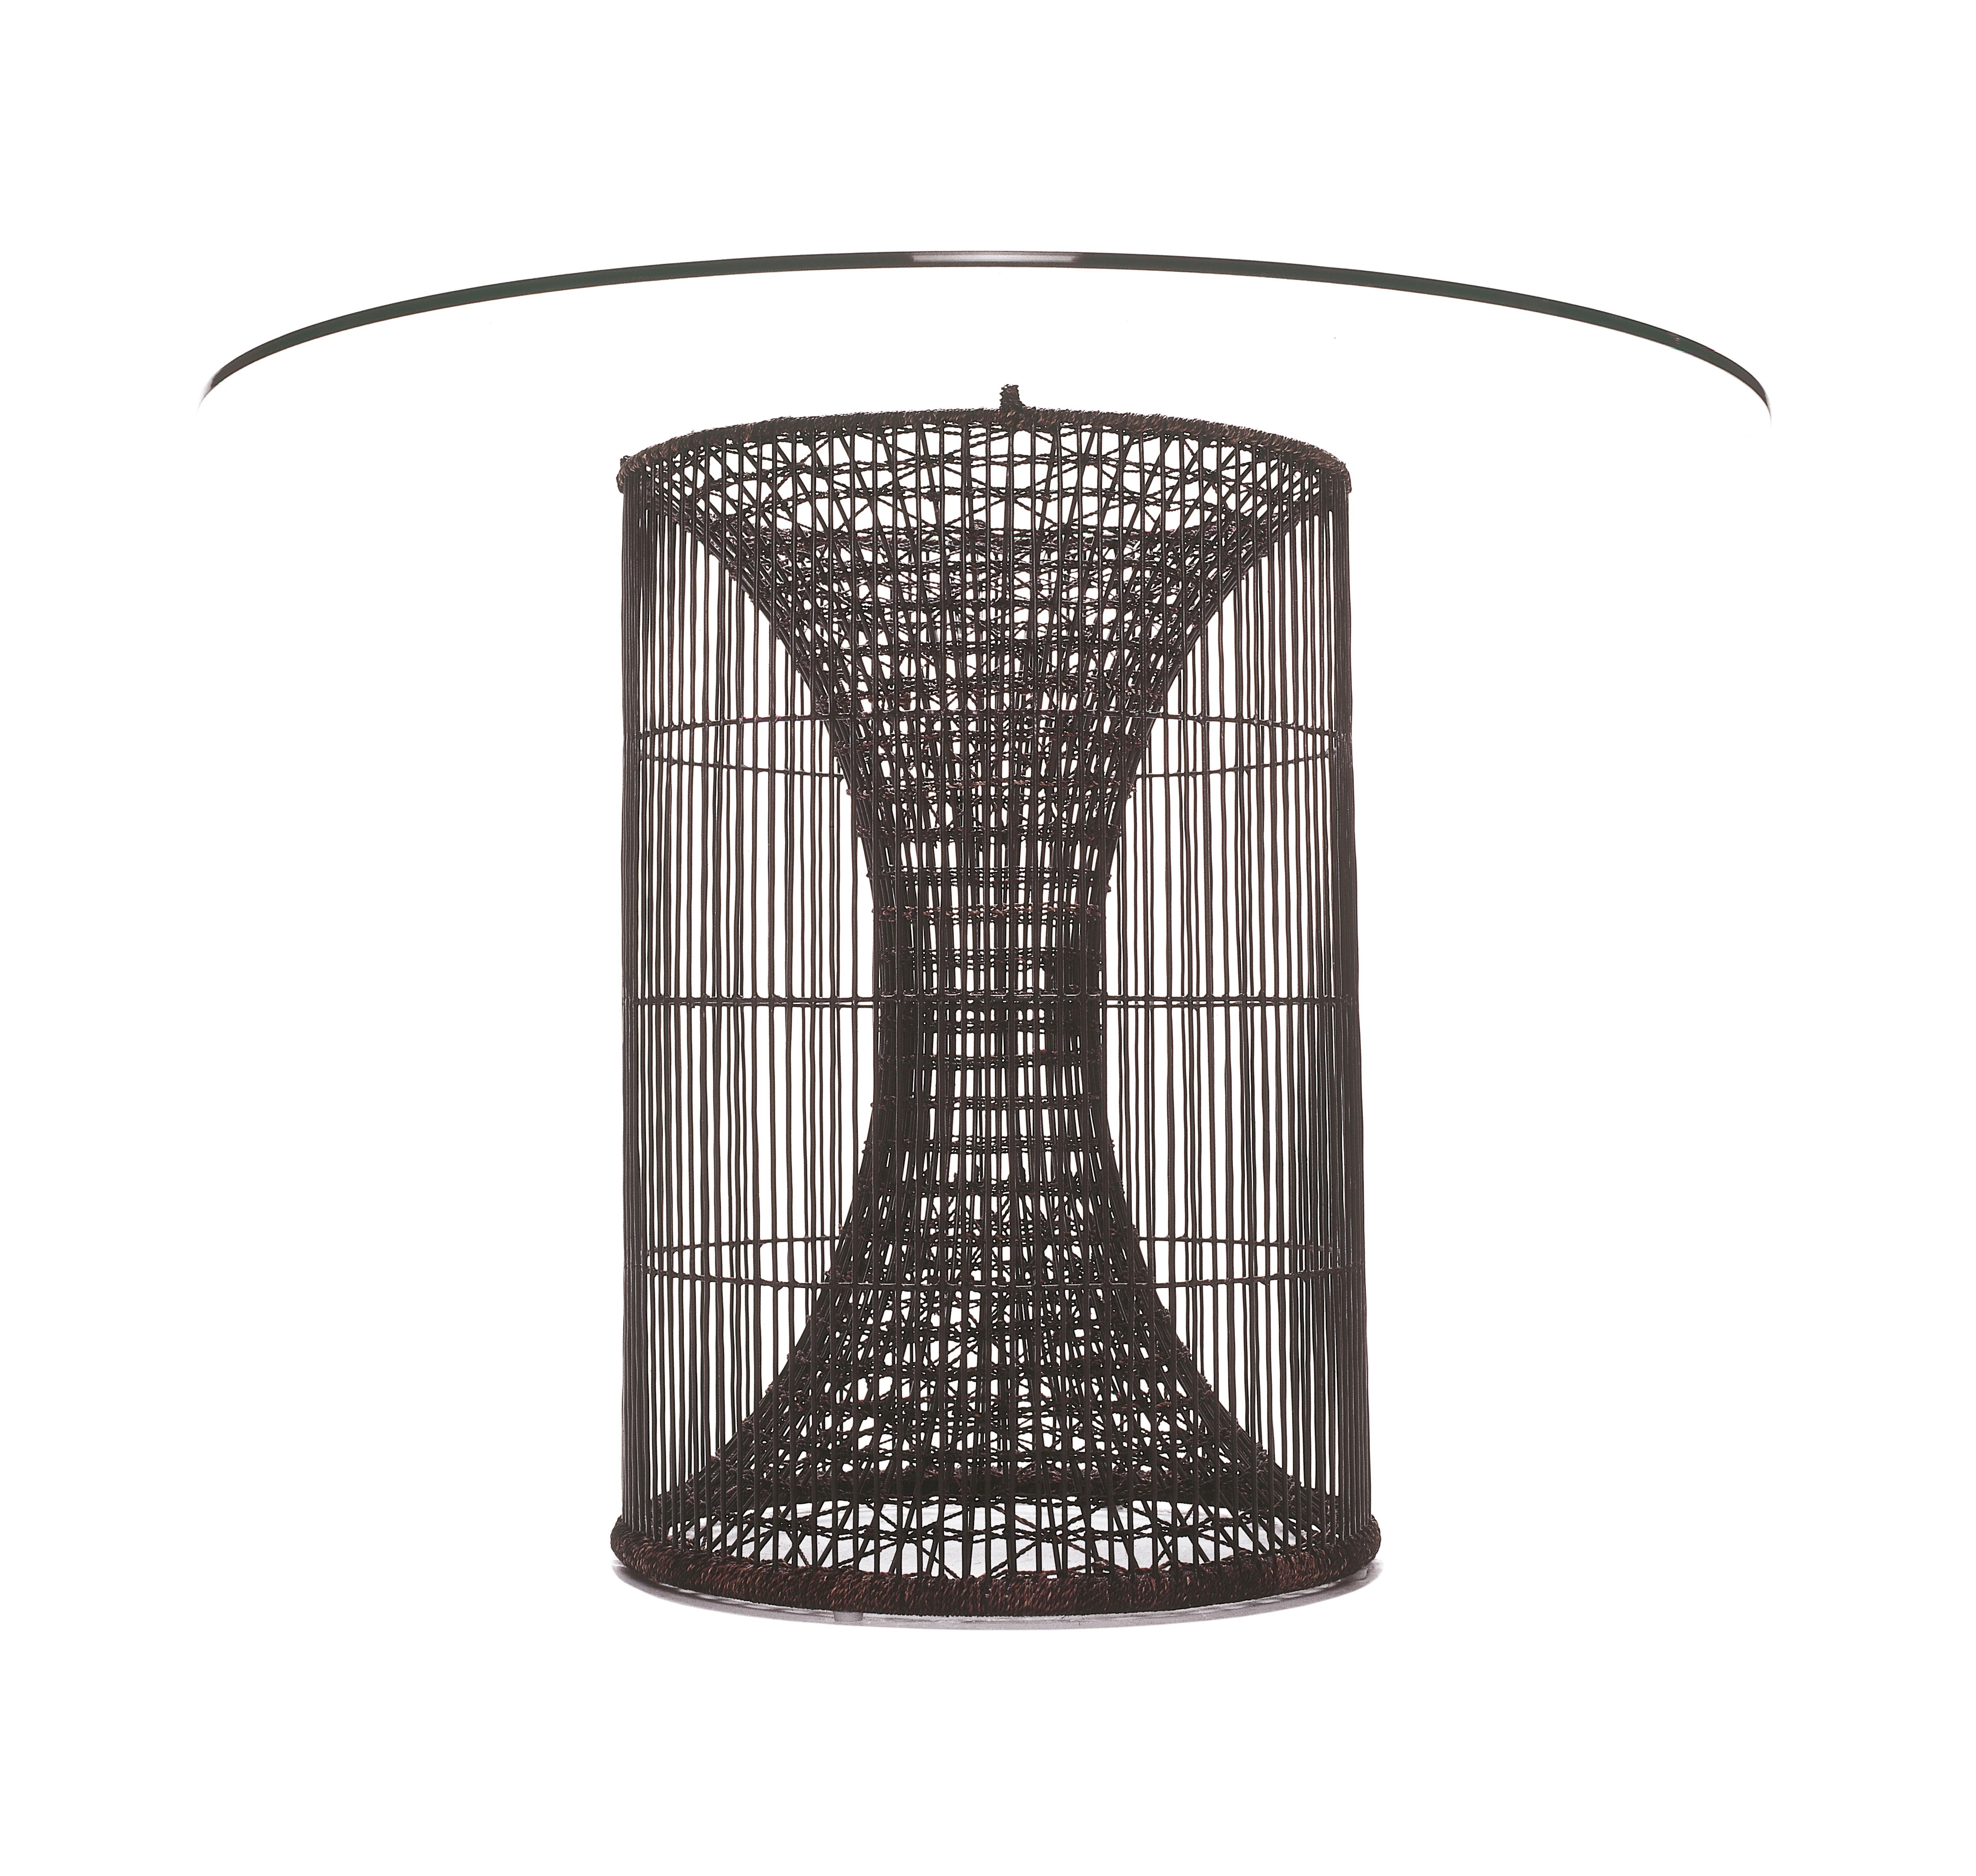 Amaya regular dining table by Kenneth Cobonpue.
Materials: Polyethelene. Steel. Glass.
Dimensions: 
Table diameter 51 cm x height 74 cm.
Glass diameter 122cm x height 1cm.

Inspired by fish traps, the Amaya tables resemble a vortex enclosed